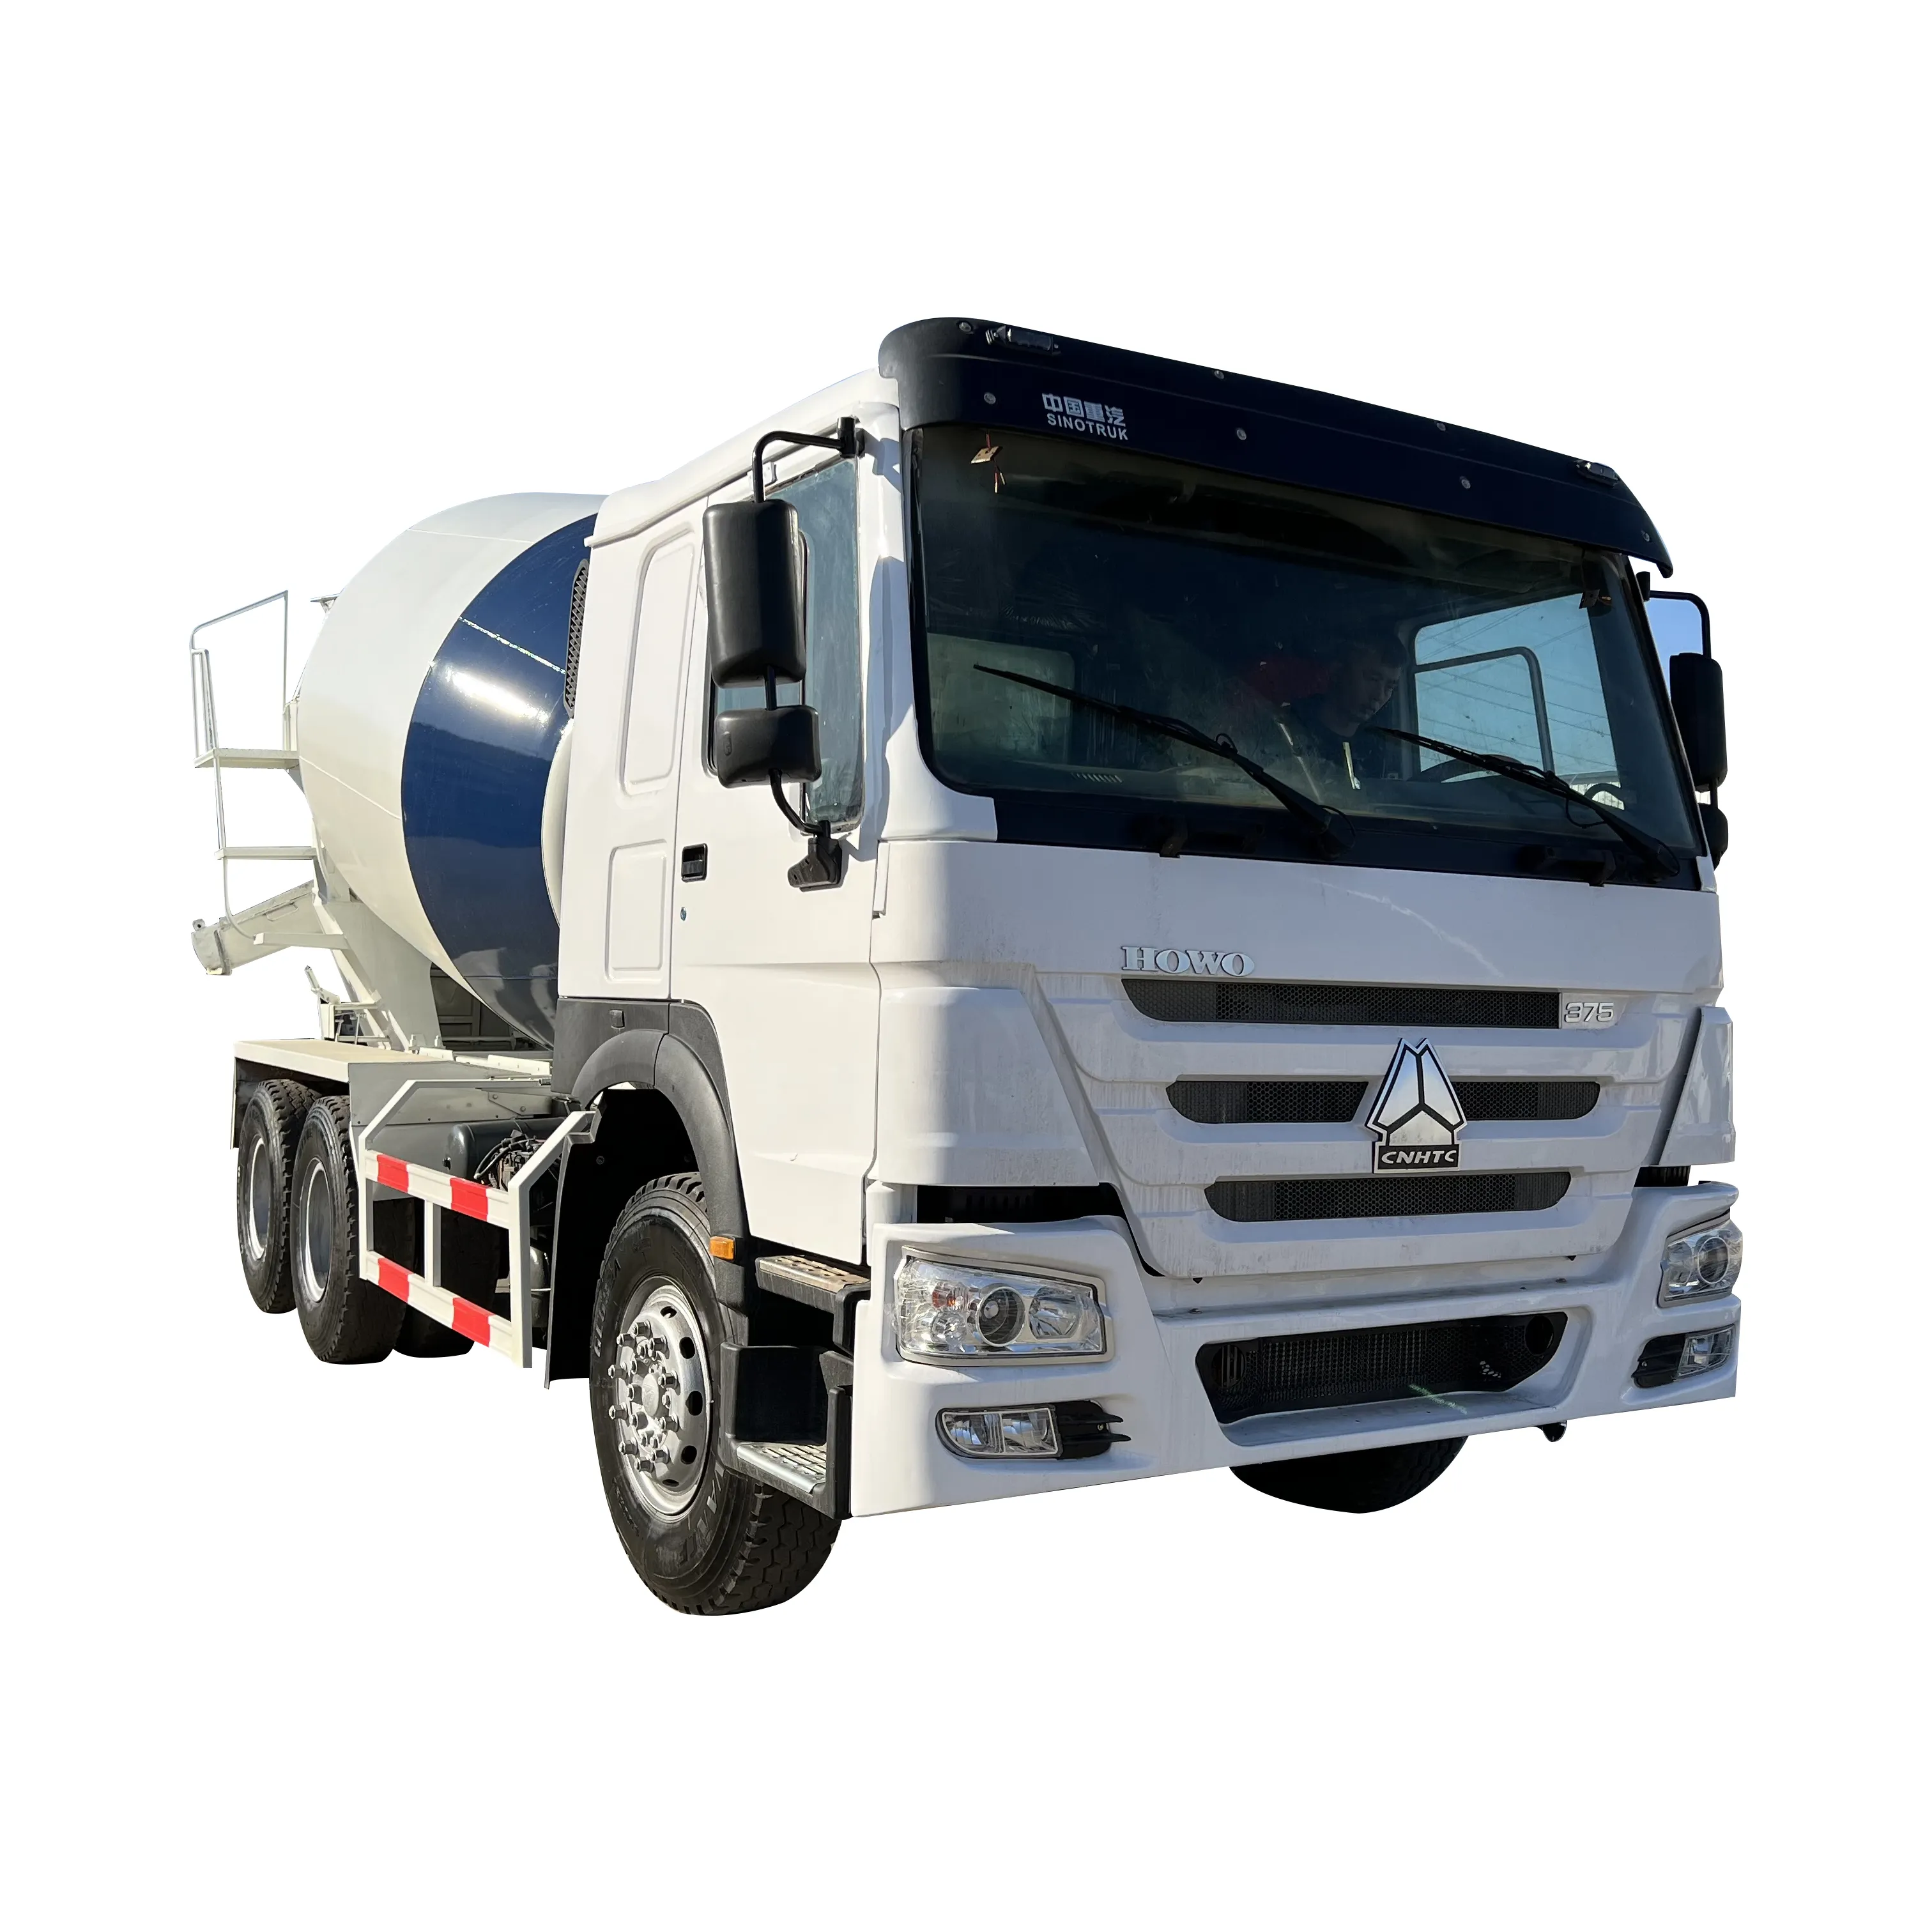 High quality Howo mixer truck made in China is on sale